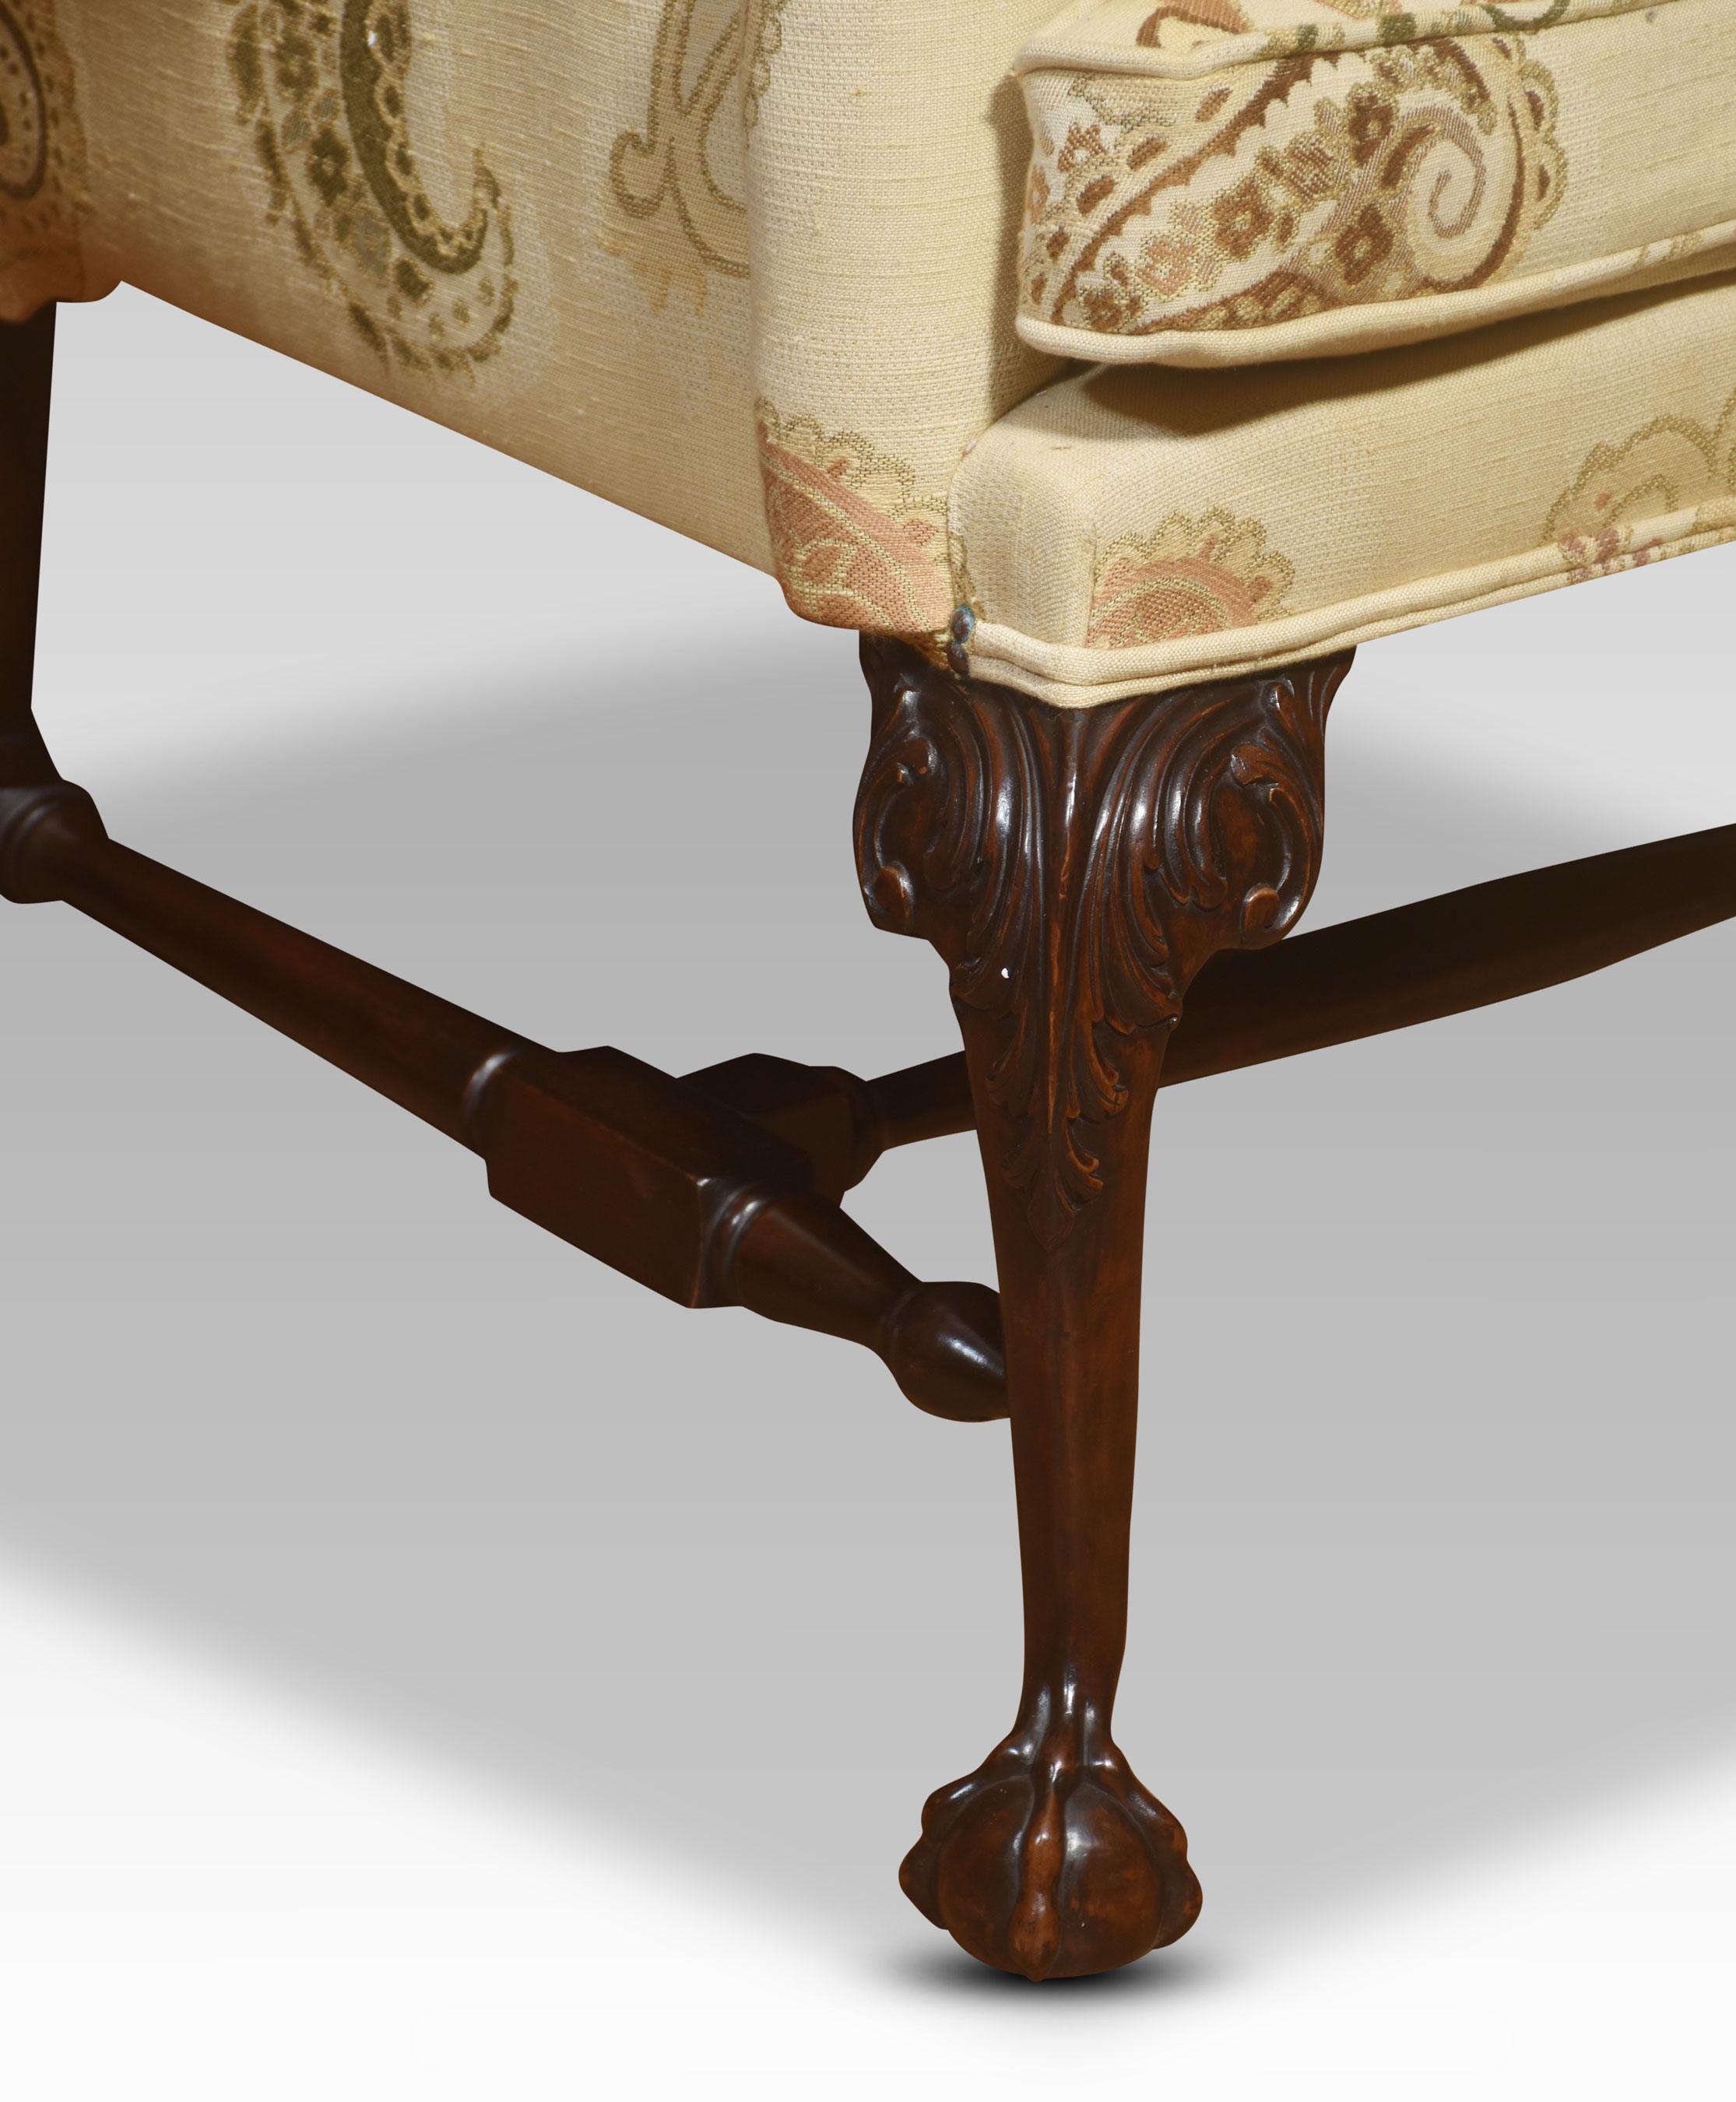 George II style armchair the shaped wing back having outswept arms supported on carved cabriolet legs terminating in claw and ball feet united by turned stretchers.
Dimensions
Height 48 Inches height to seat 20.5 Inches
Width 33 Inches
Depth 35